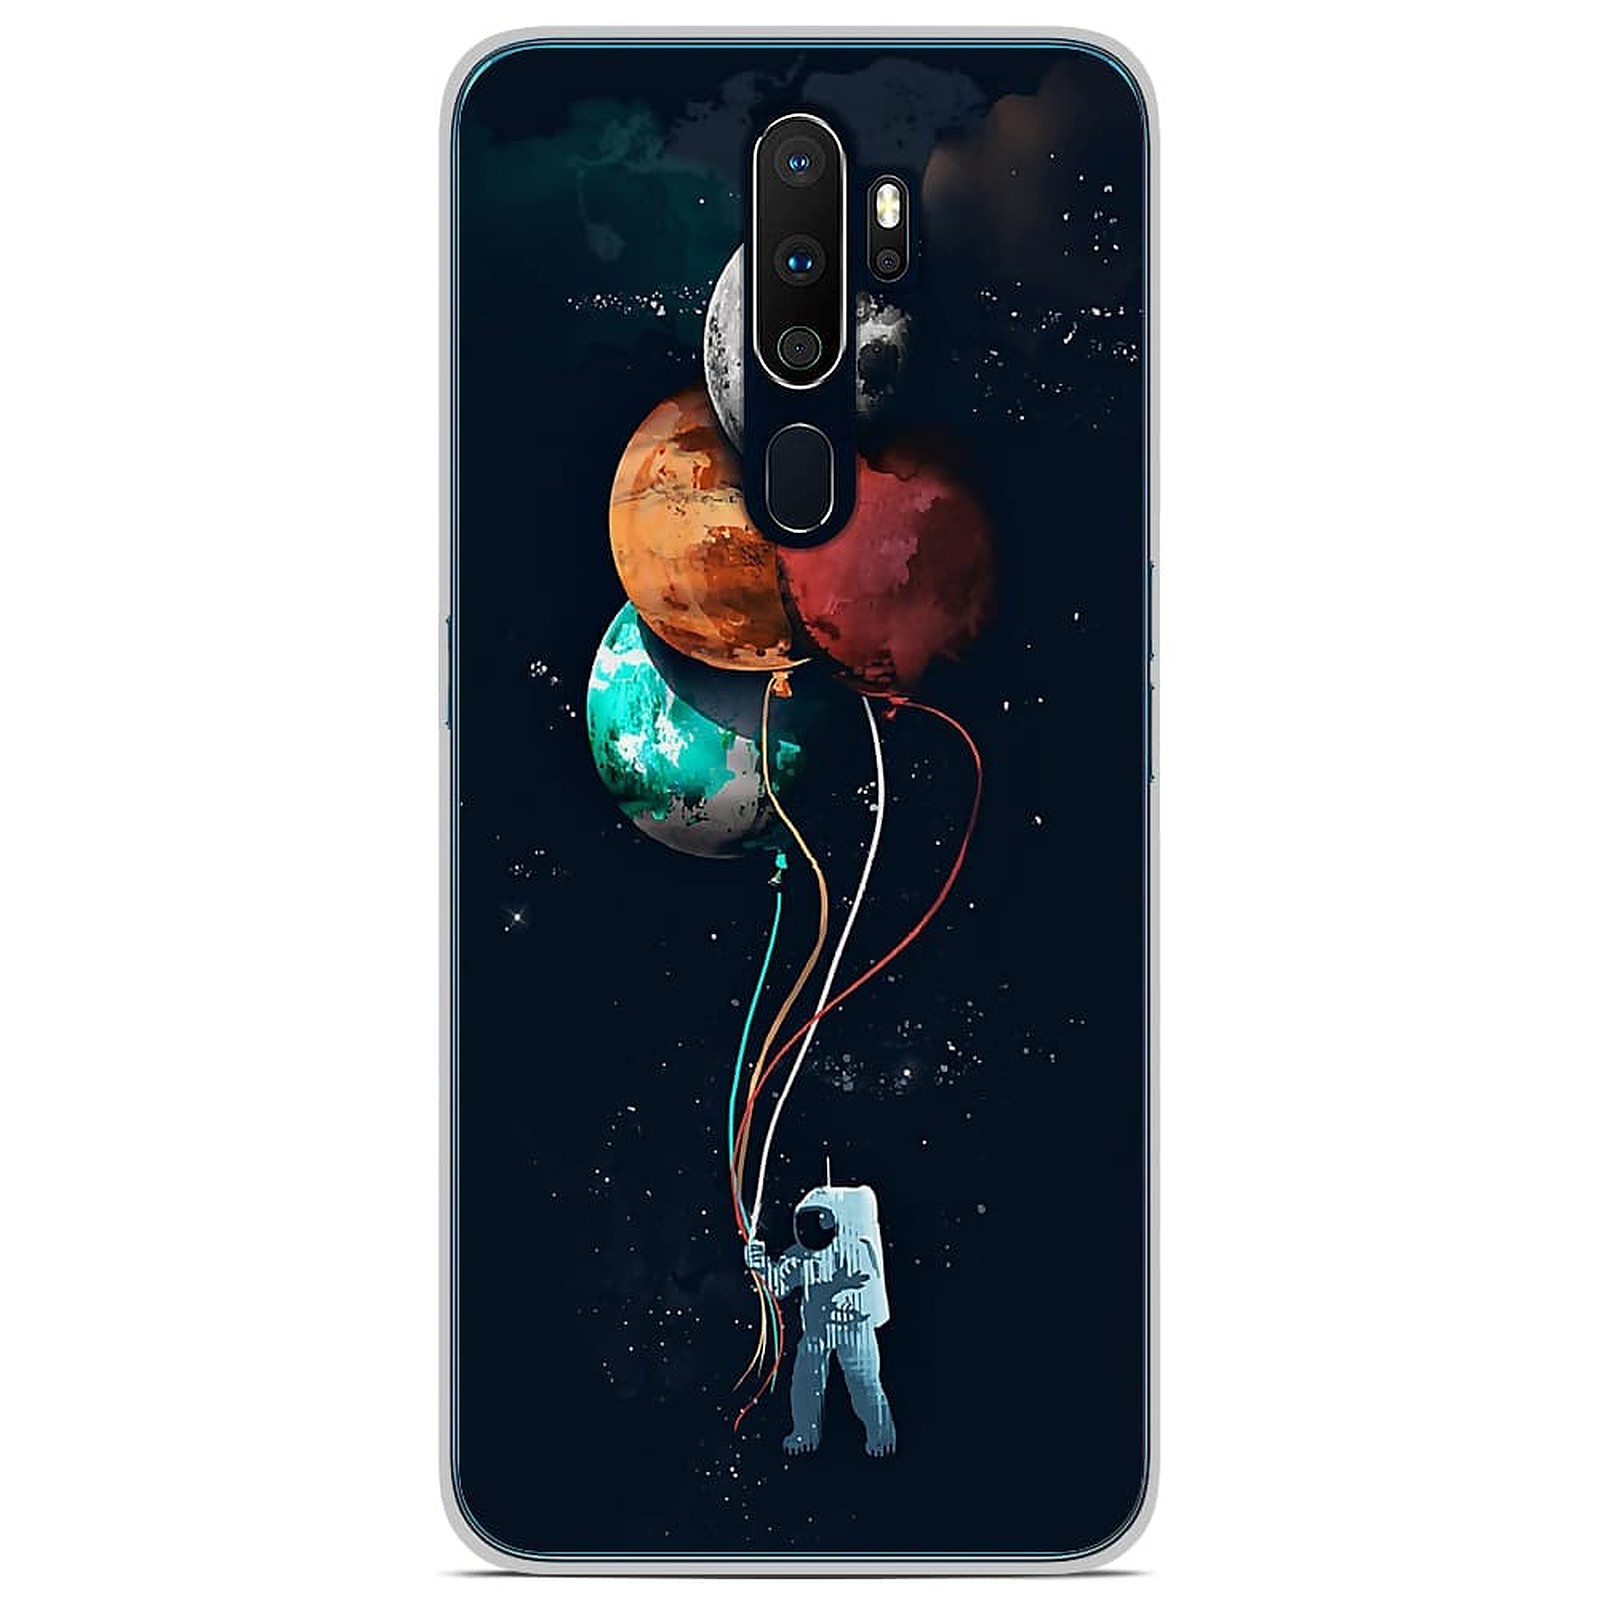 1001 Coques Coque silicone gel Oppo A9 2020 motif Cosmonaute aux Ballons - Coque telephone 1001Coques